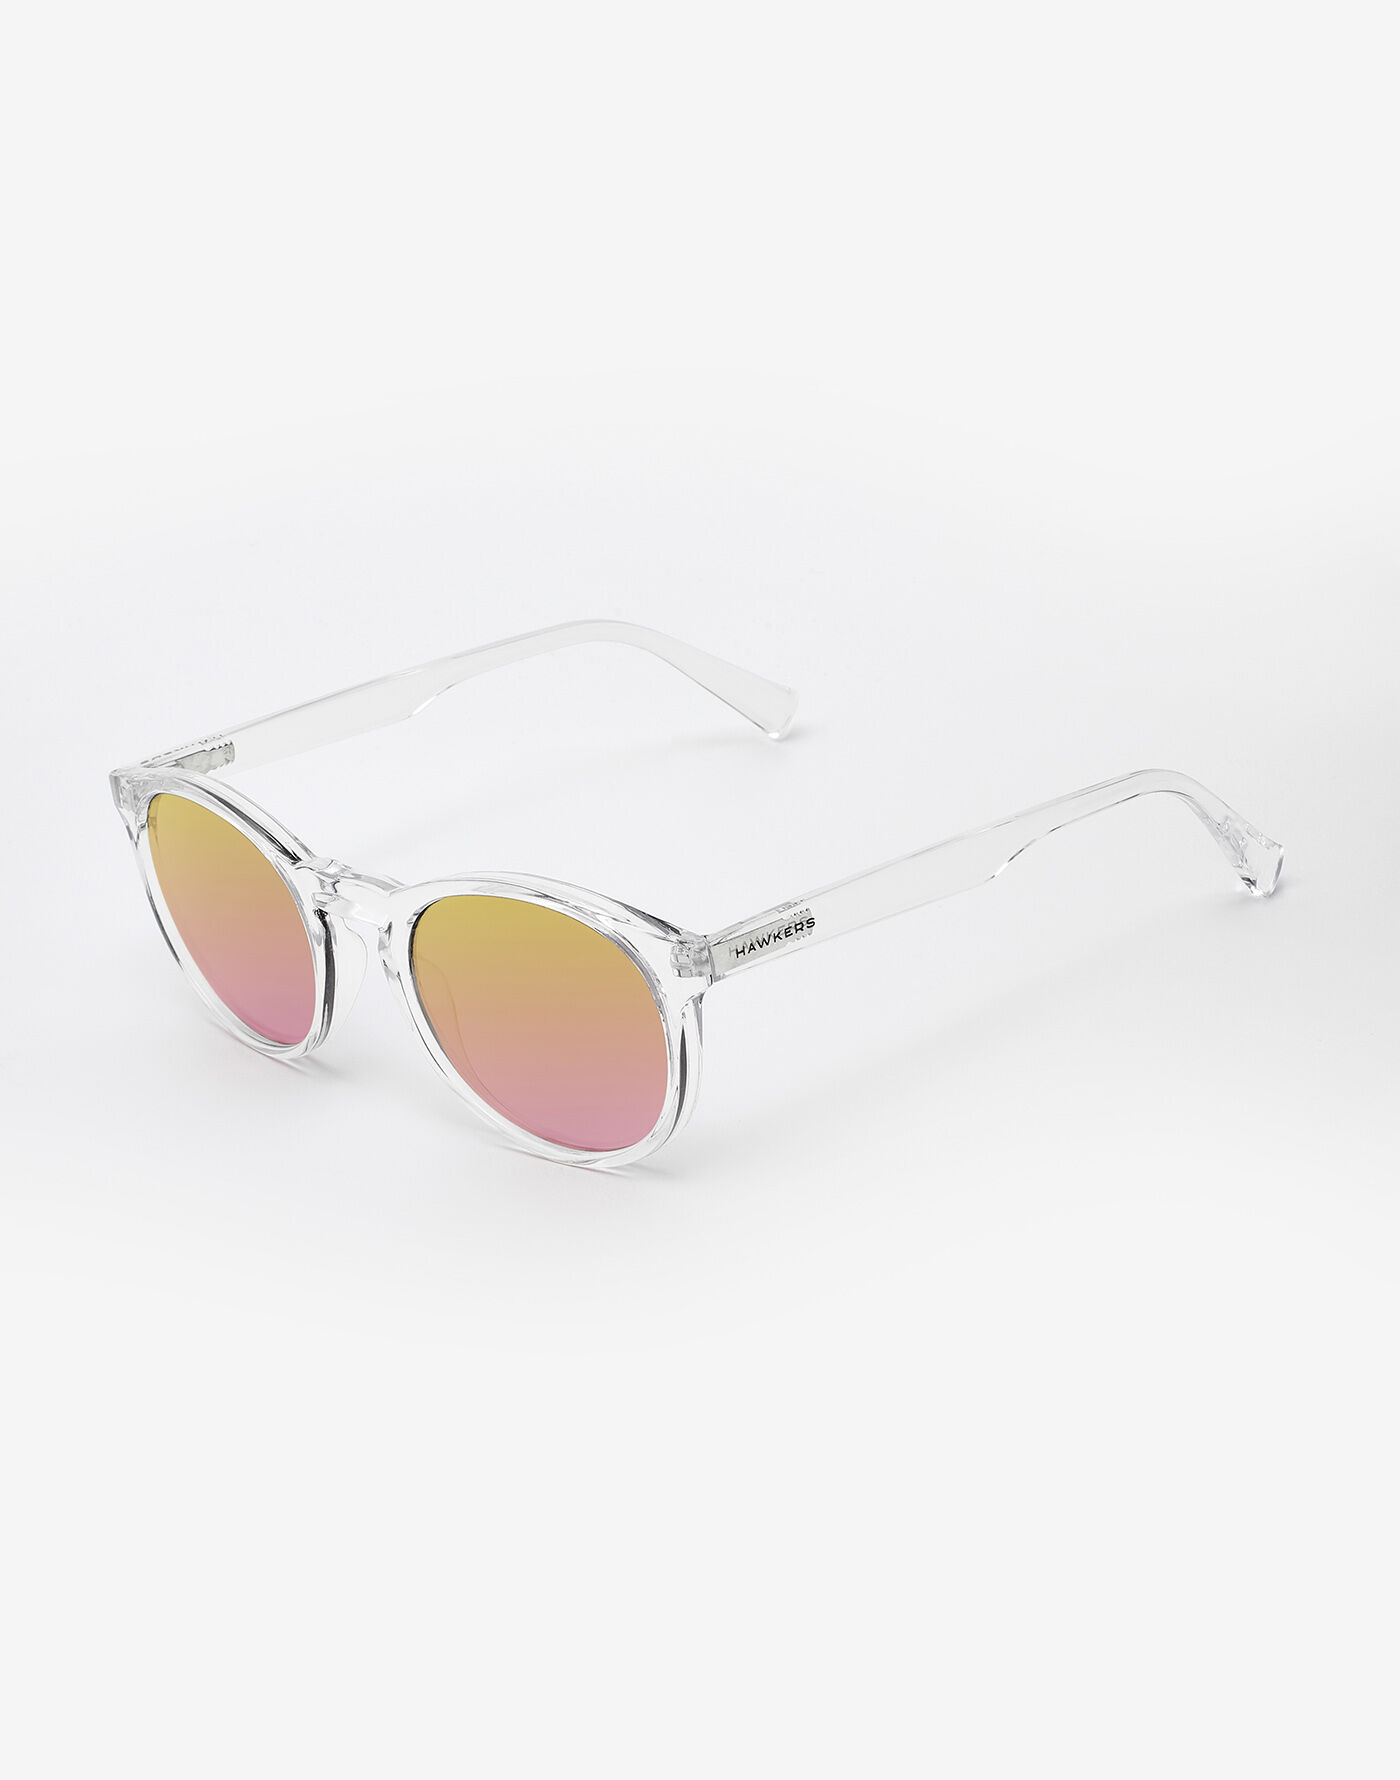 Buy Man Pink Sunglasses Online | Hawkers USA® Official Store